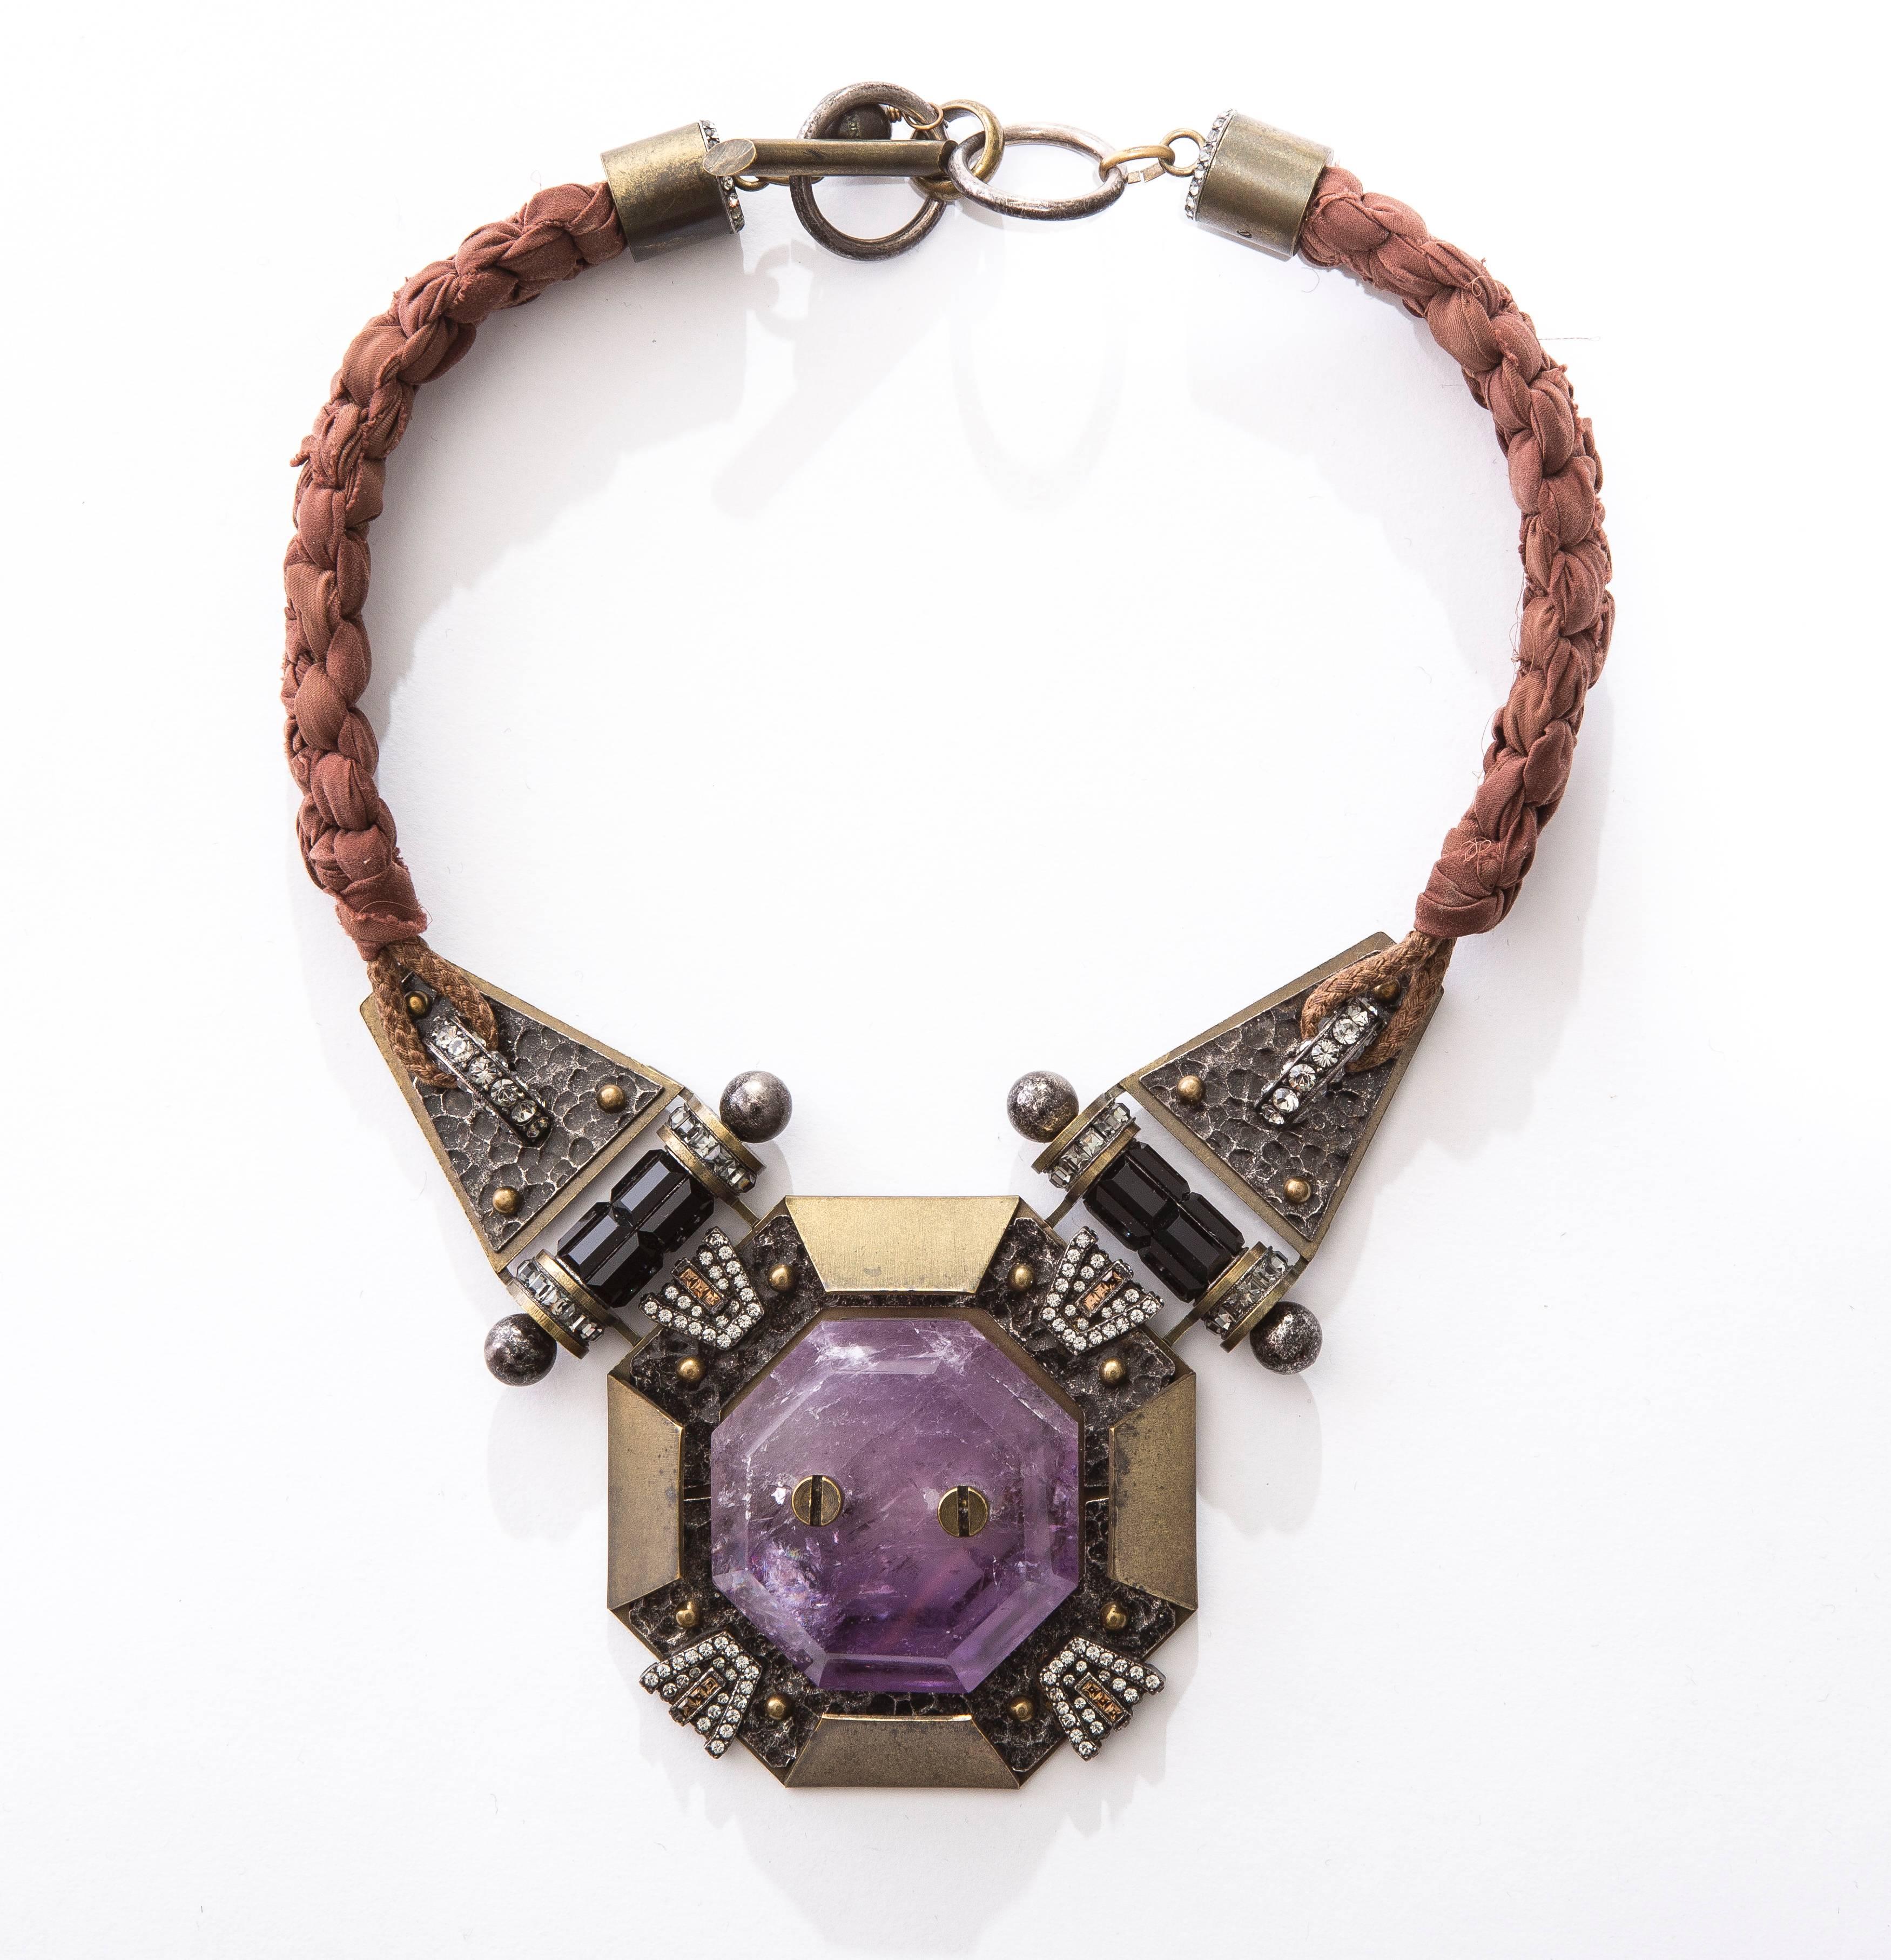 Lanvin by Alber Elbaz chiffon braided necklace with Swarovski crystal accents, amethyst at center and toggle lock closure. Includes original box.

Chain Length 16”, Ornament Width 3”, Ornament Length 3”